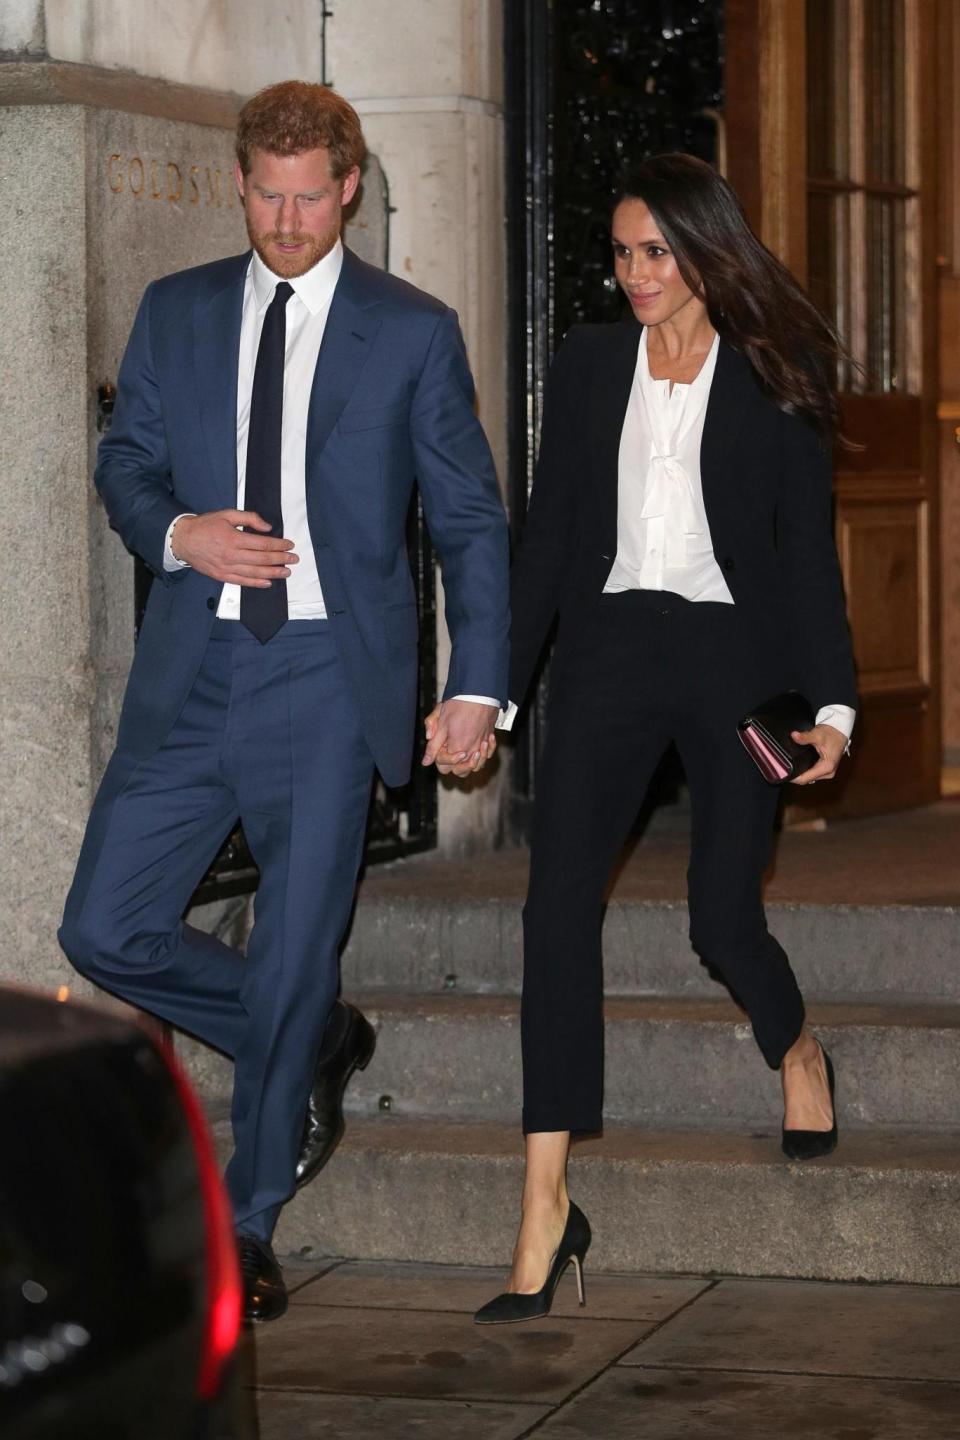 Couple: Harry and Meghan have visited various organisations around the UK (Getty Images)